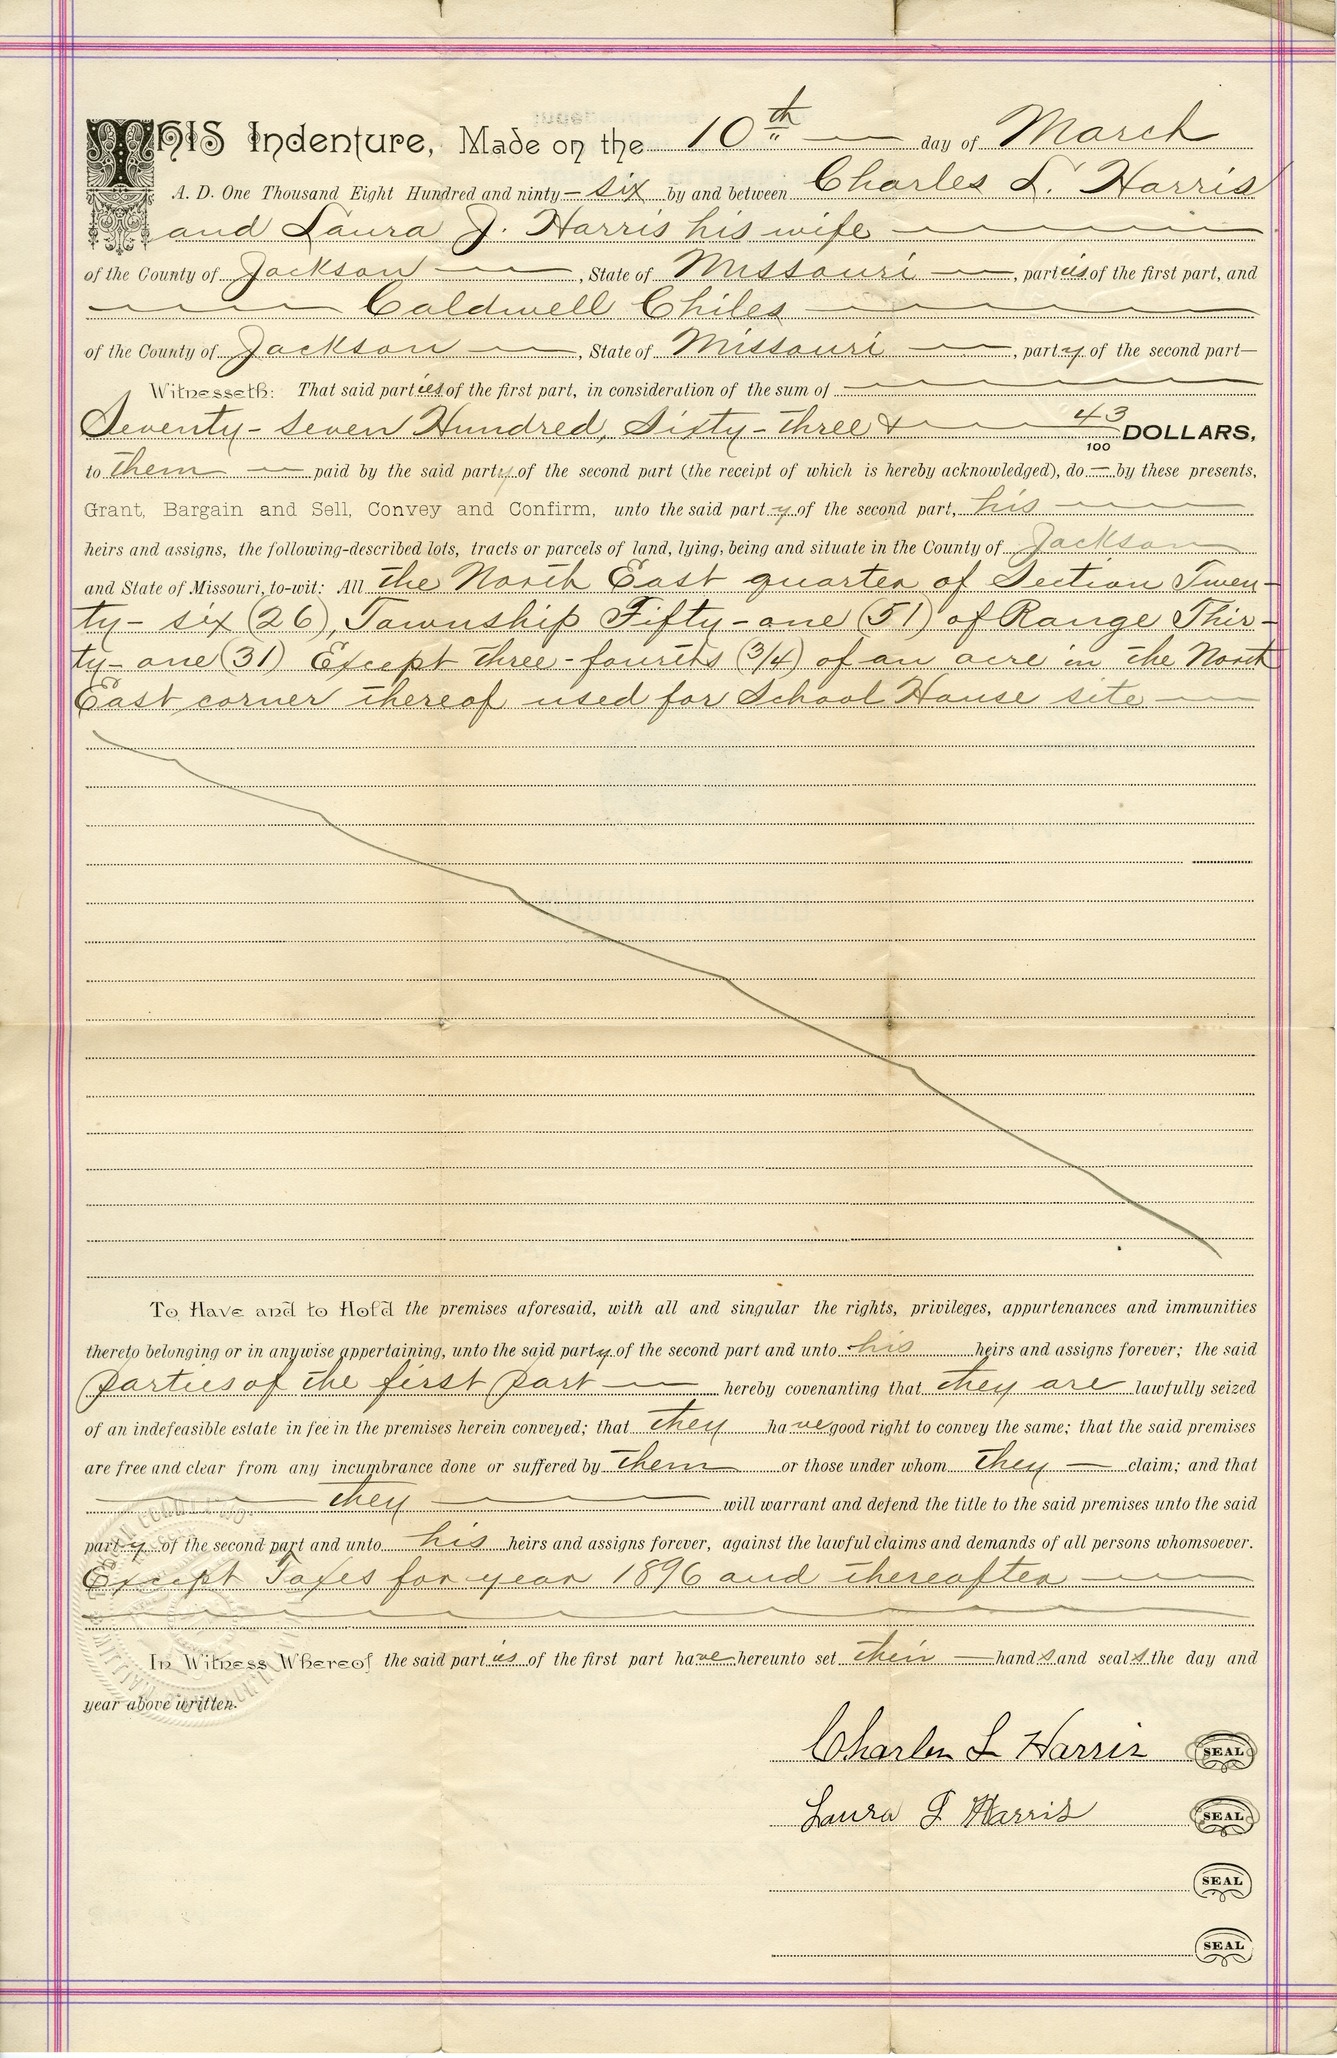 Warranty Deed from Charles L. Harris and Laura J. Harris to Caldwell Chiles